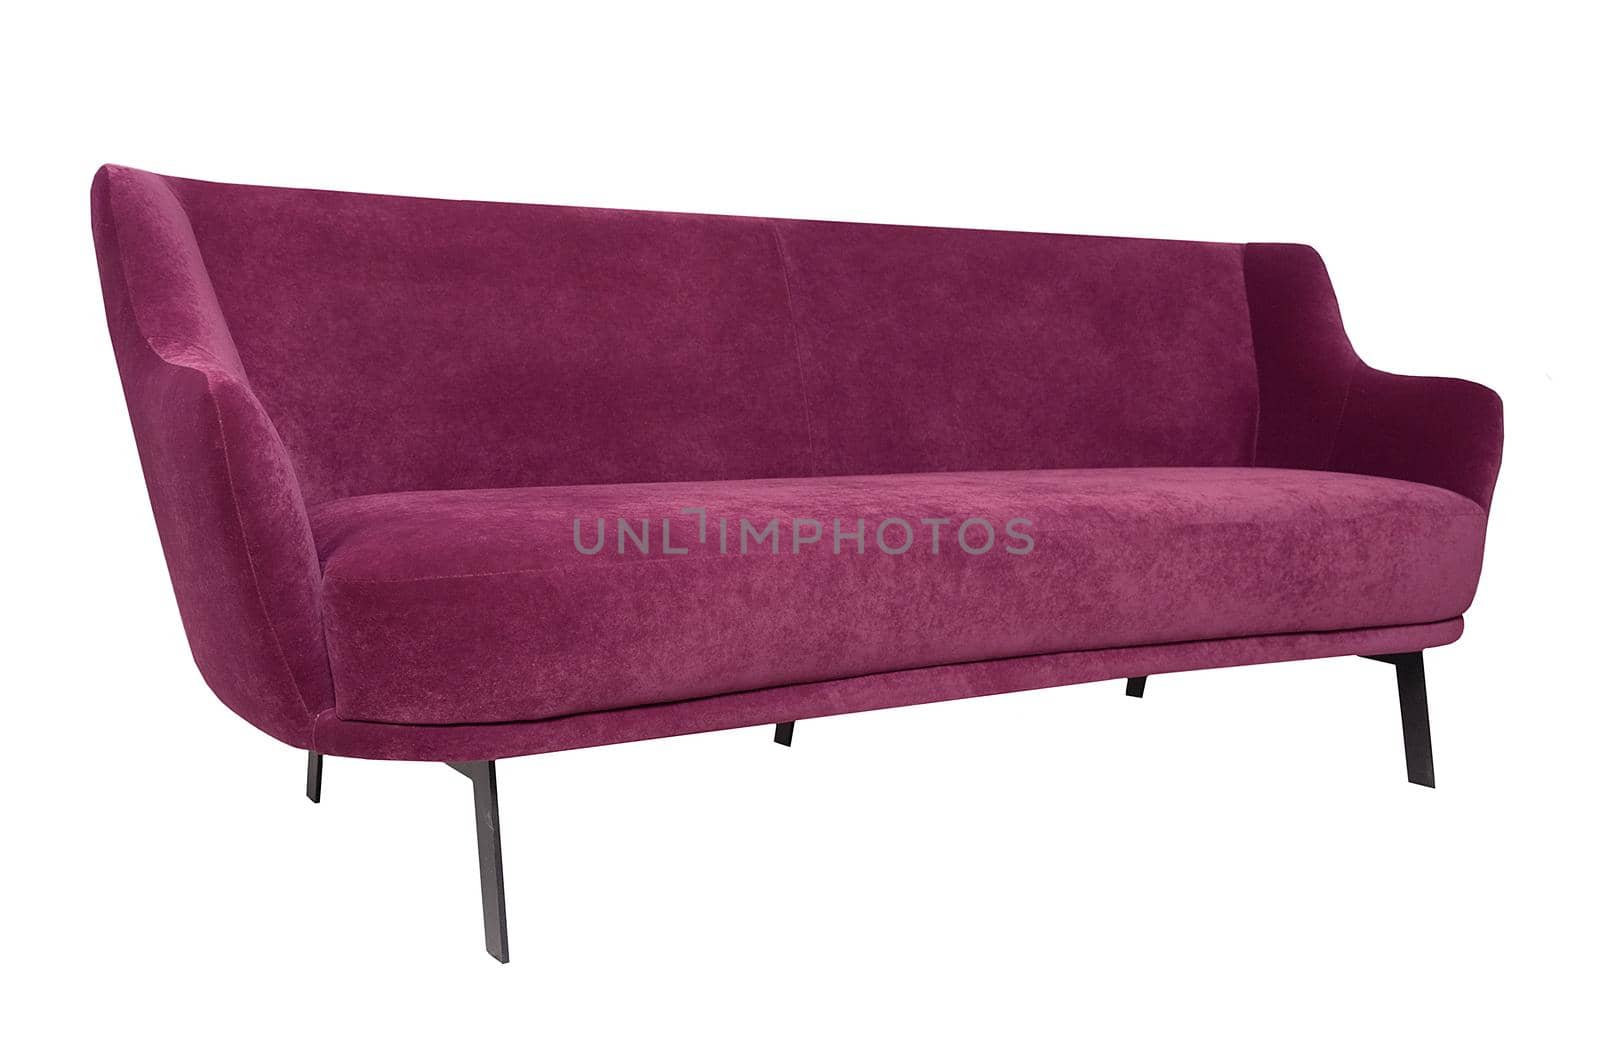 Modern scarlet fabric sofa isolated on white background. Front view. Strict style furniture